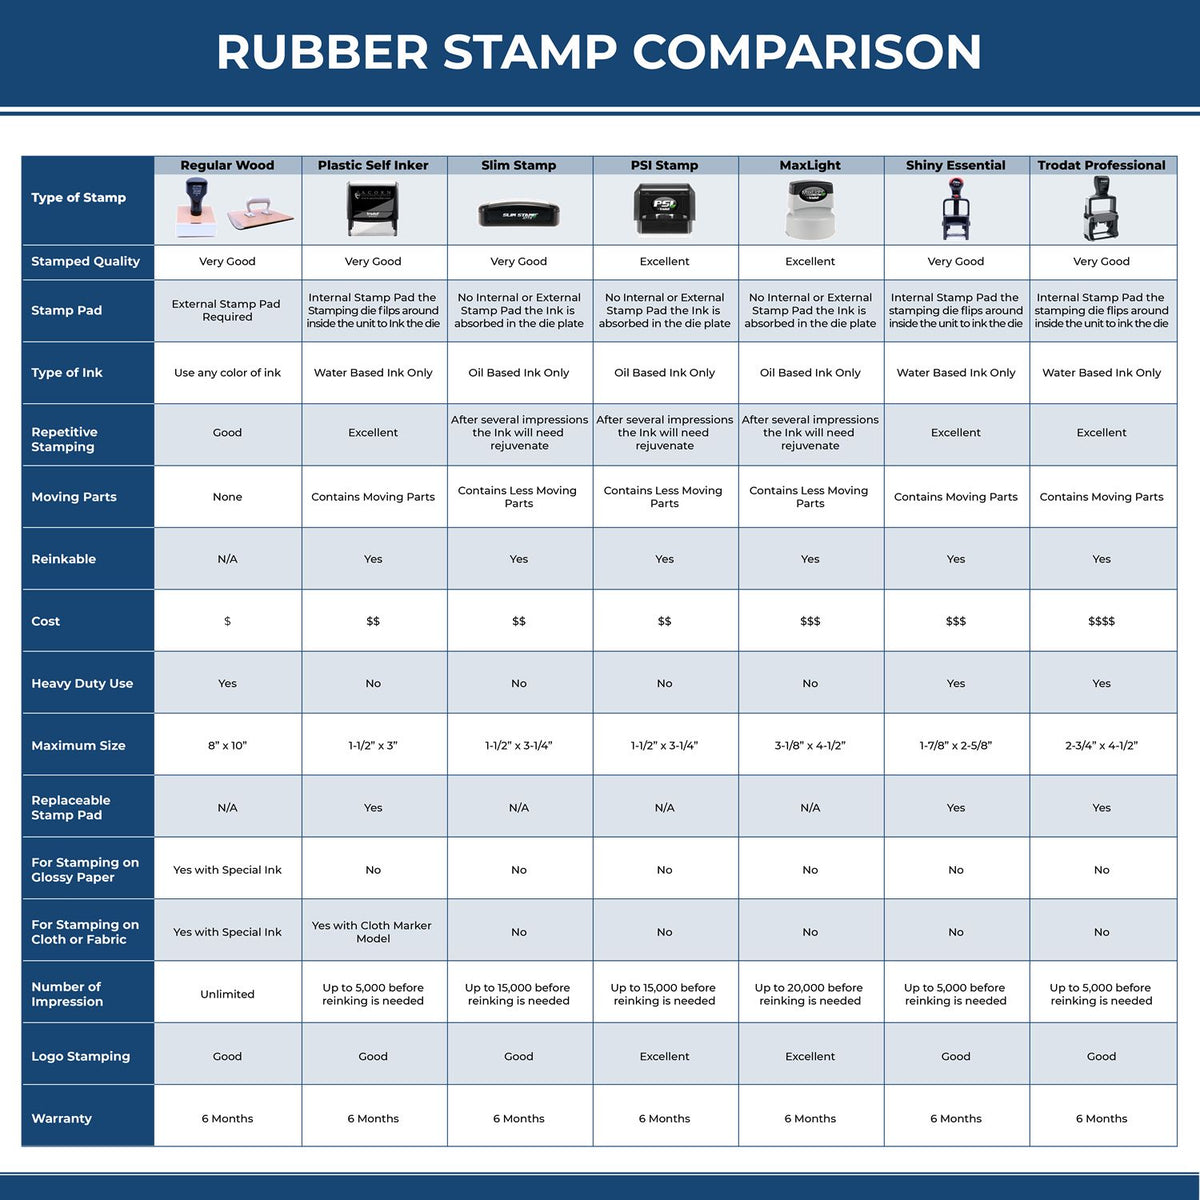 A comparison chart for the different types of mount models available for the Heavy-Duty Wisconsin Rectangular Notary Stamp.